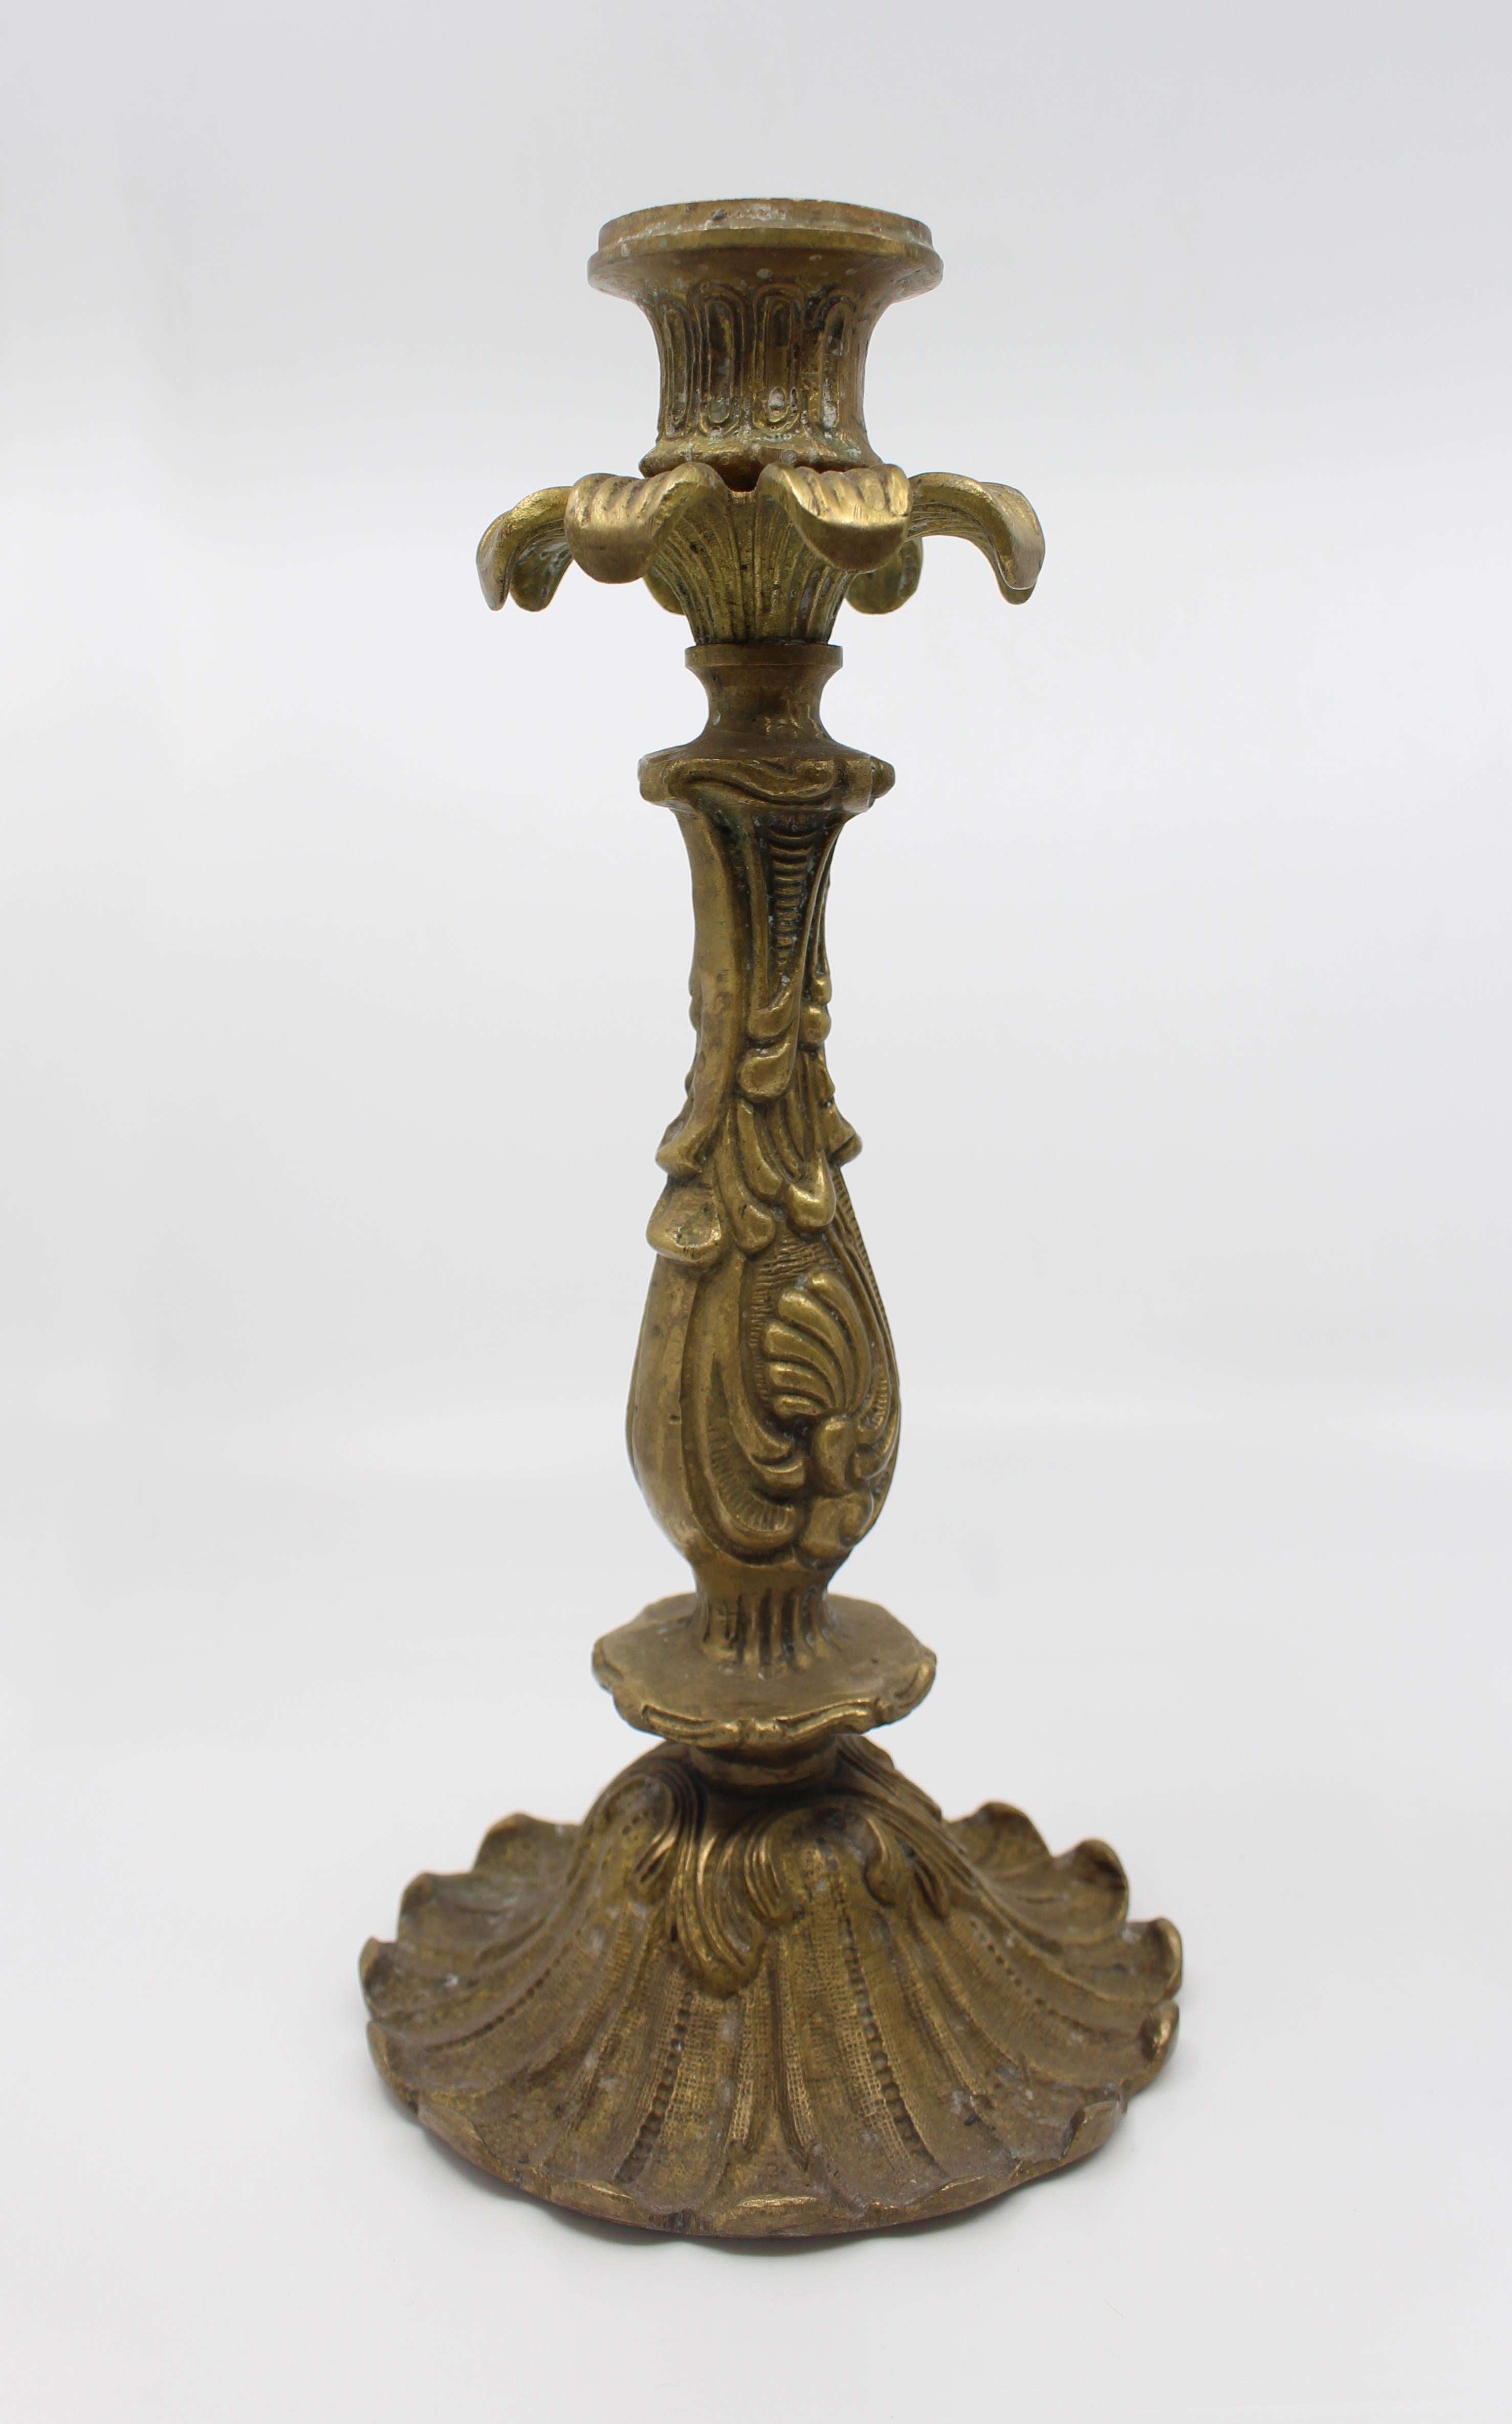 Period: Mid-20th century, antique style
Measures: Width 13 cm / 5 1/4 in
Height 28 cm / 11 in
Condition: Good condition. Heavy, sold old candle grease as pictured
 

 

Pair of heavy vintage decorative brass candlesticks

